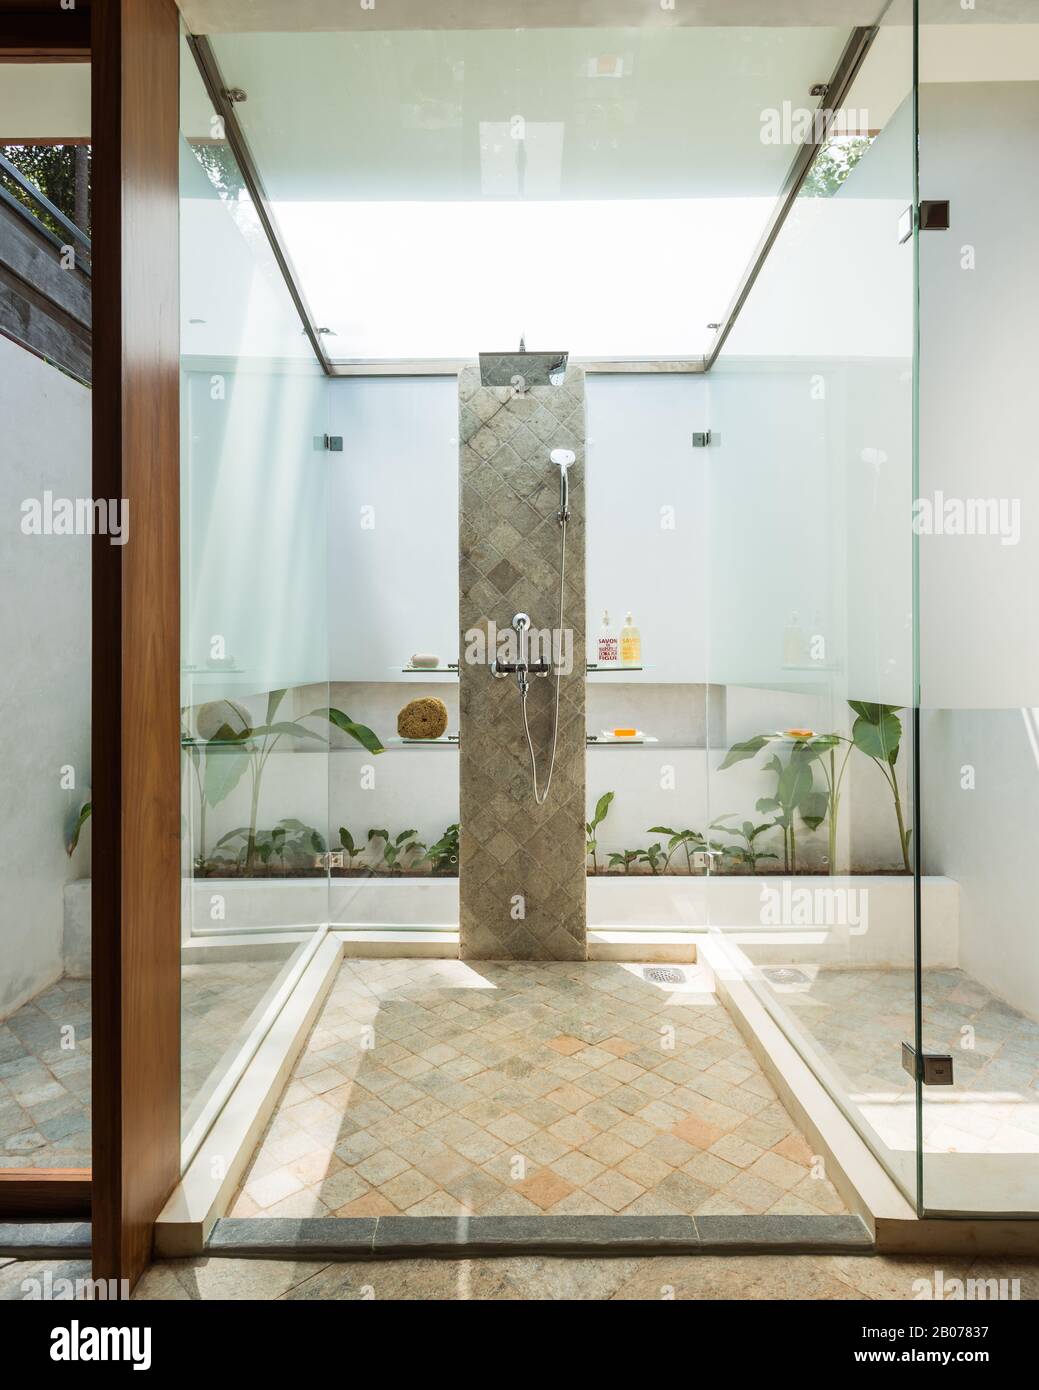 Glass shower protruding into courtyard Stock Photo